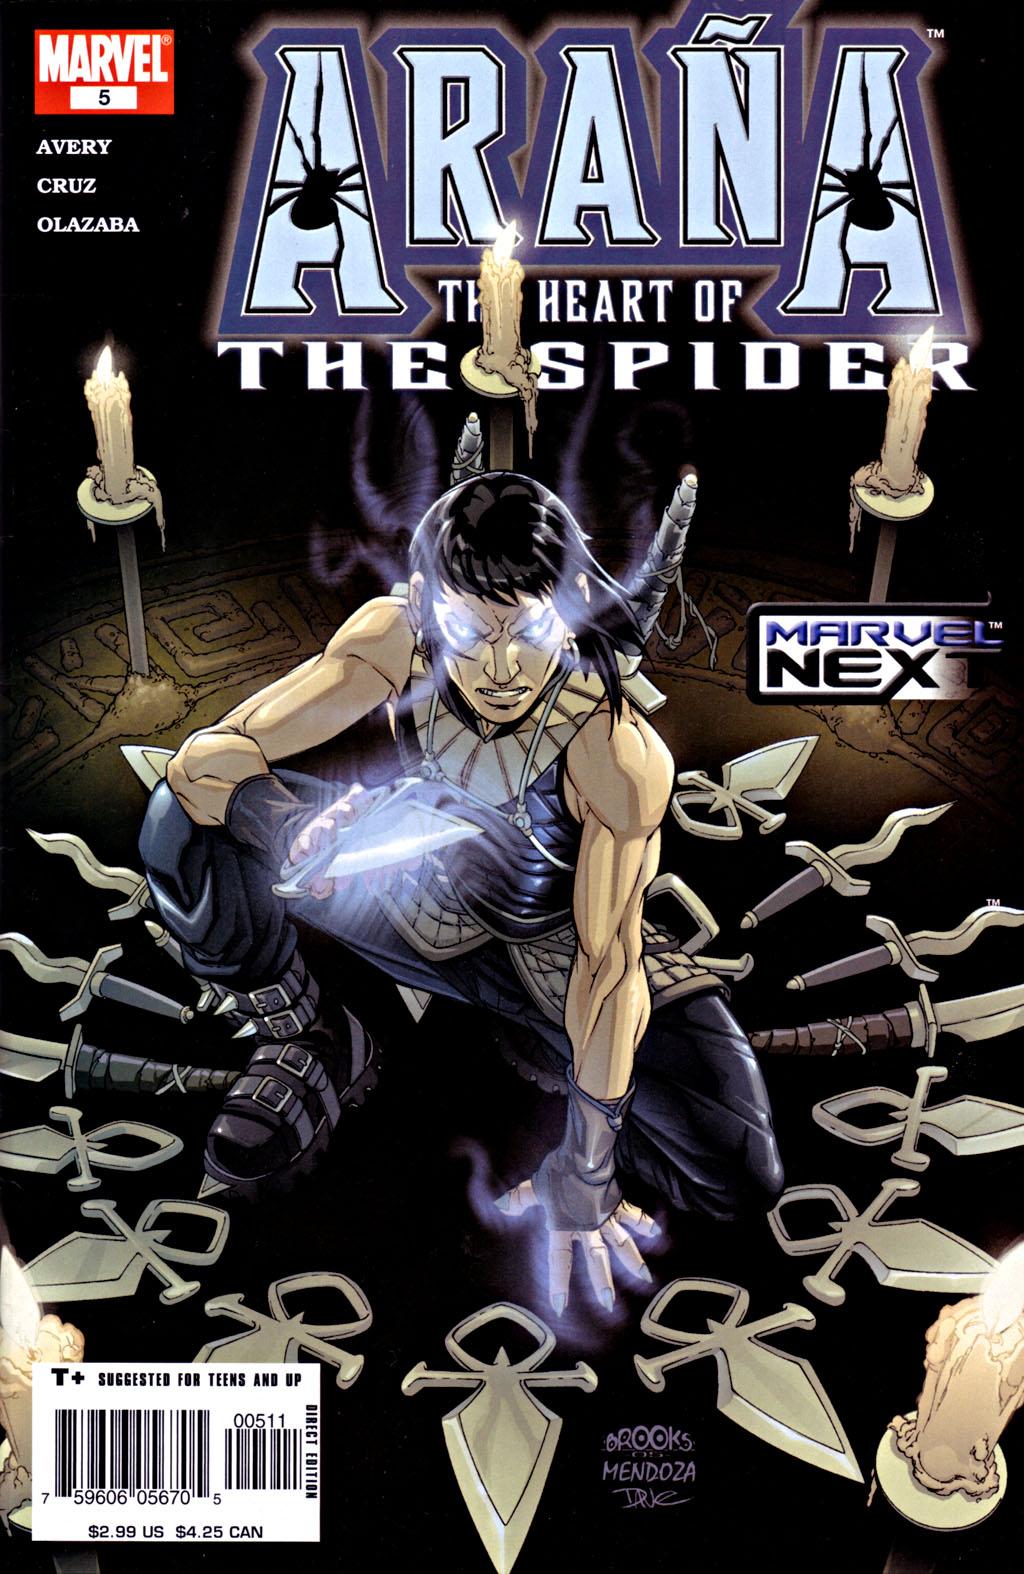 Araa: The Heart of the Spider Vol. 1 #5